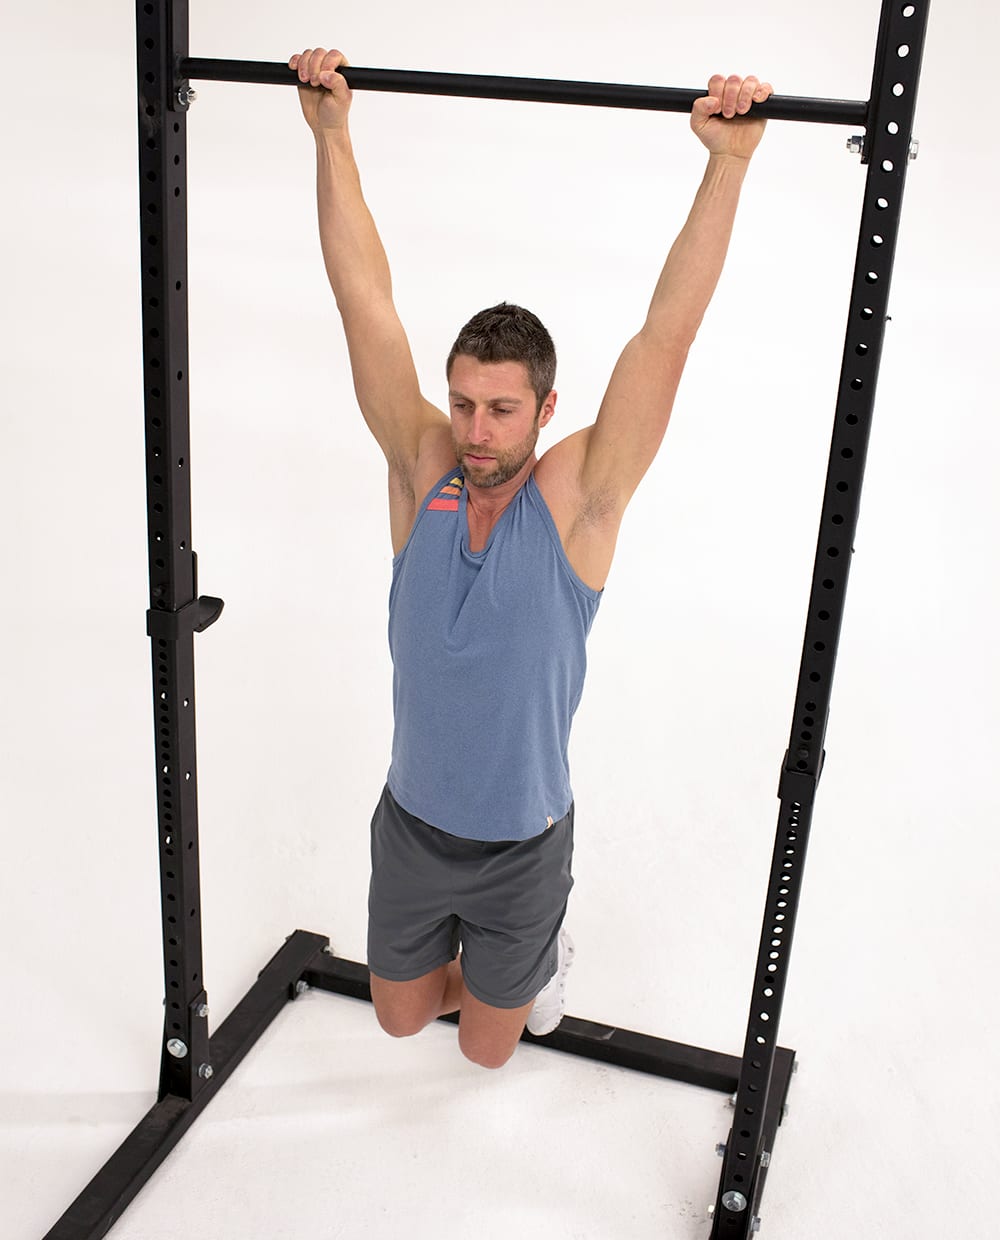 Man Does Dead Hang | Isometric Exercise